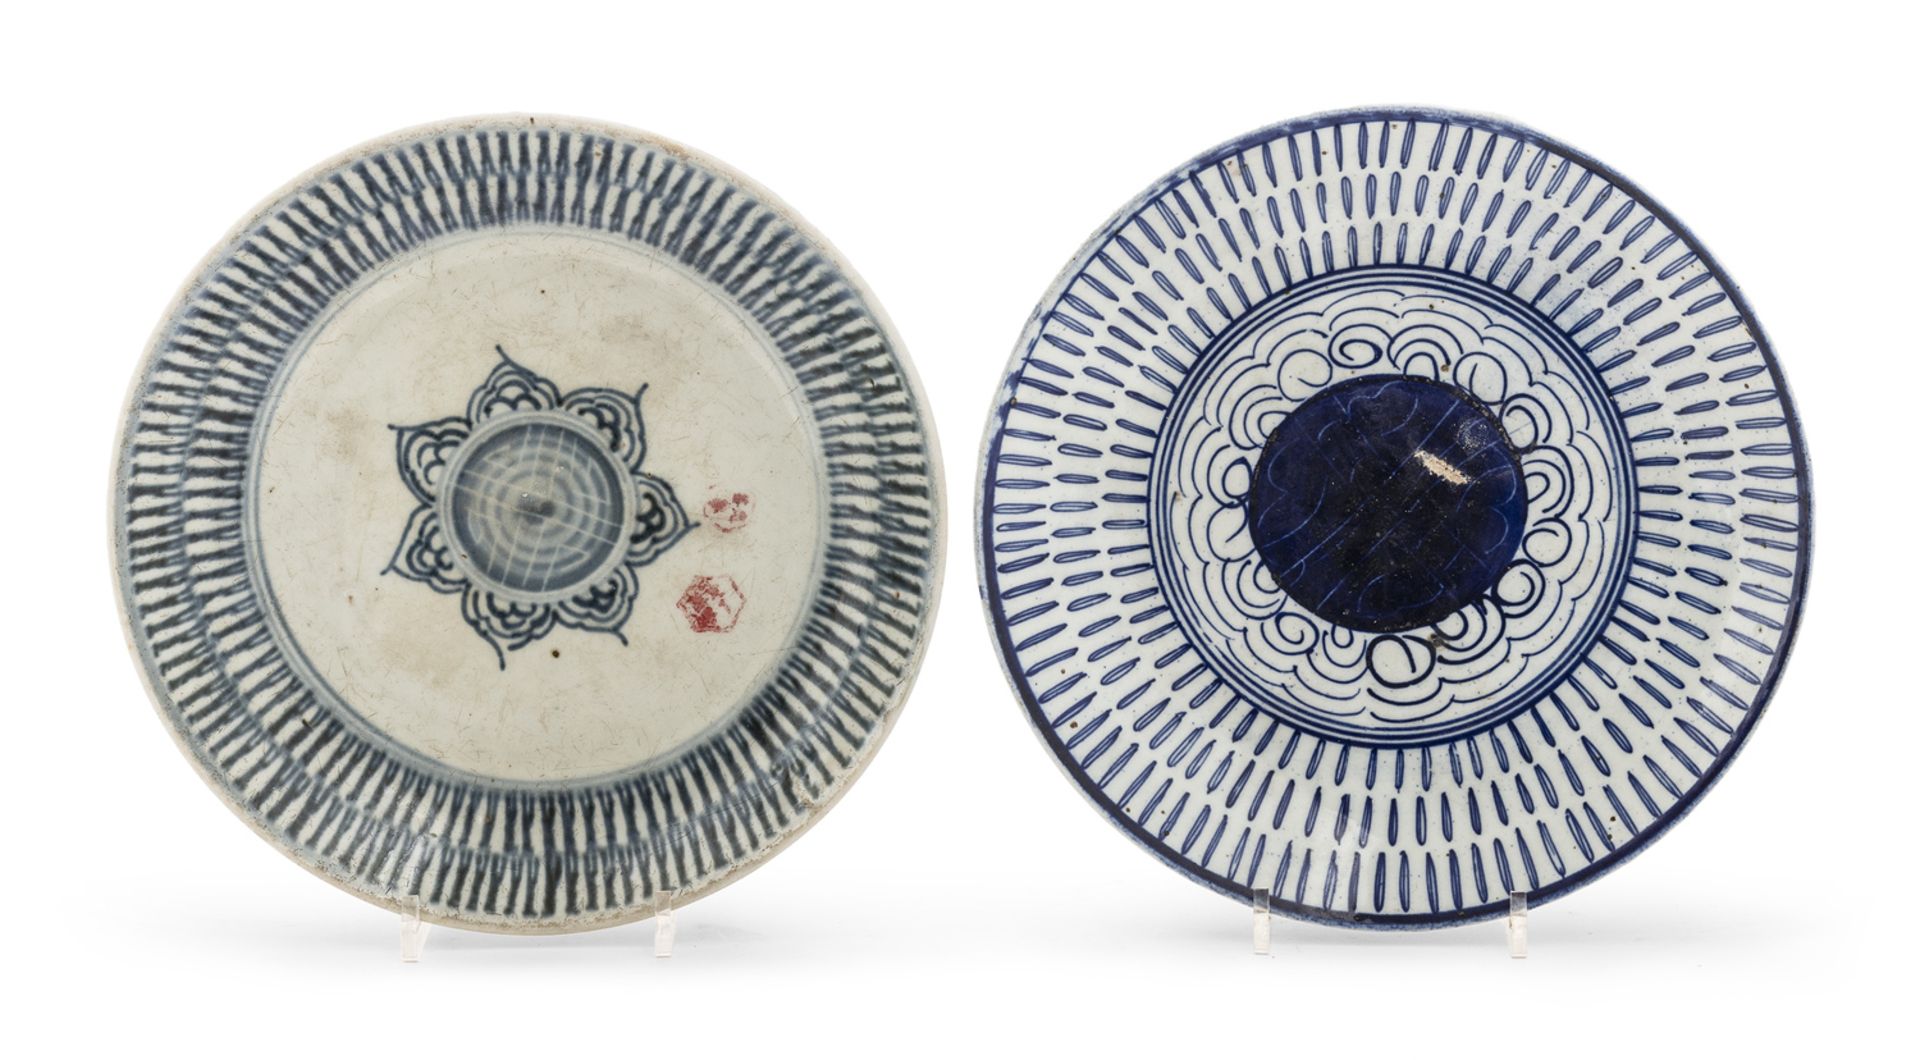 TWO CHINESE WHITE AND BLUE PORCELAIN DISHES EARLY 20TH CENTURY. DEFECTS.